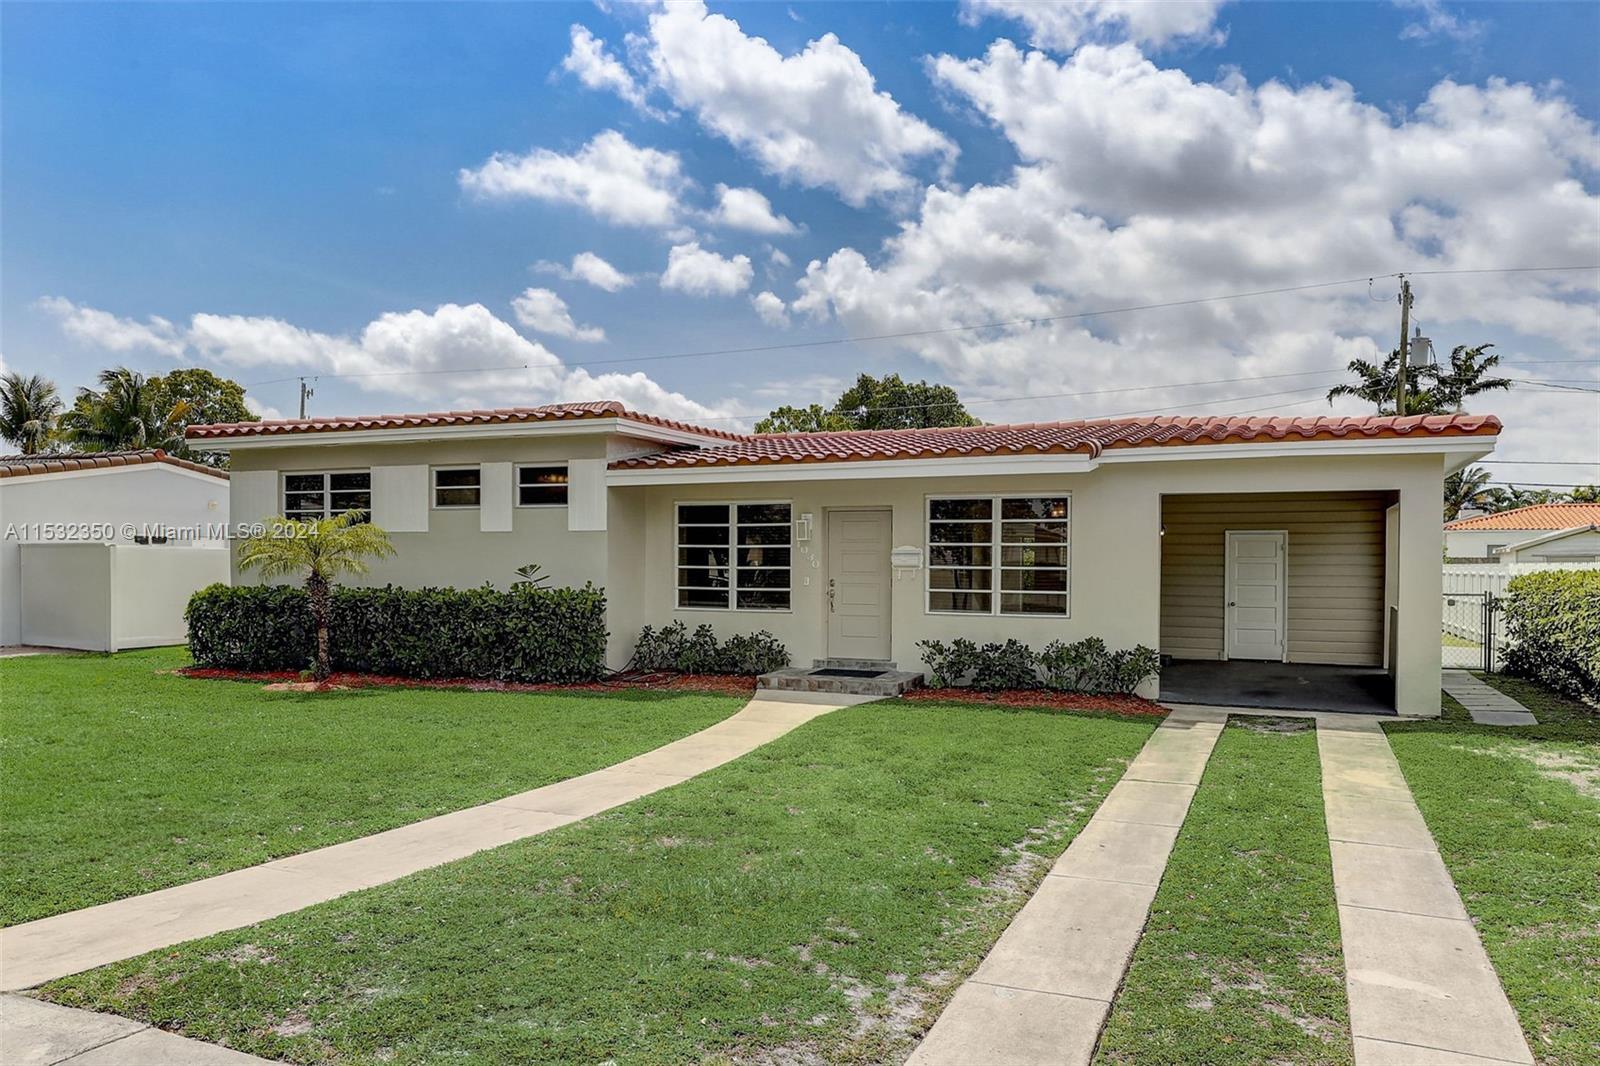 Photo of 1030 Nightingale Ave in Miami Springs, FL